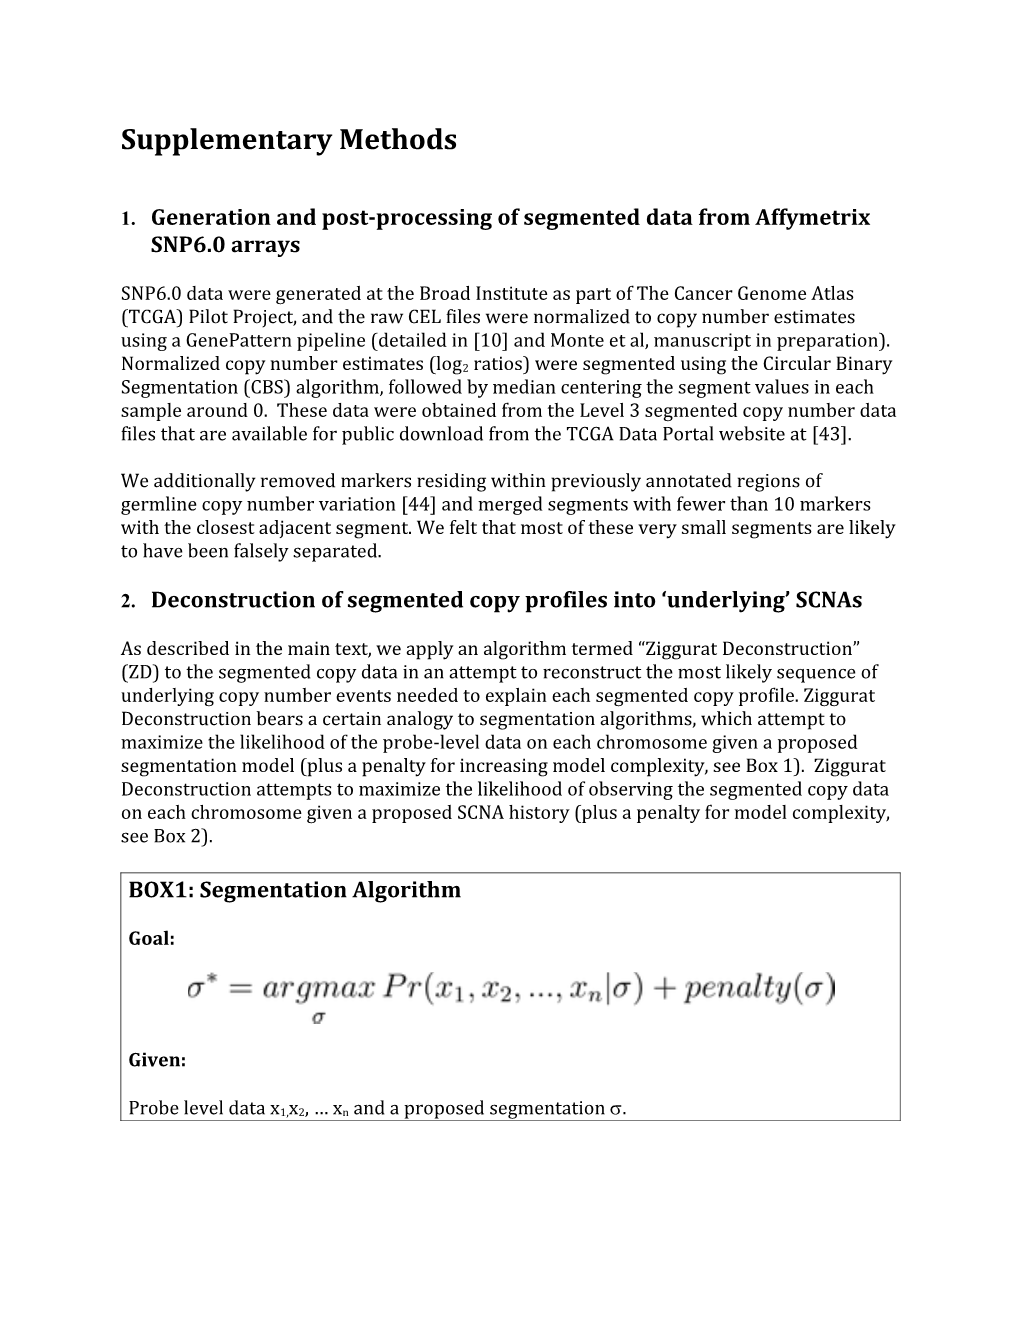 1.Generation and Post-Processing of Segmented Data from Affymetrix SNP6.0 Arrays